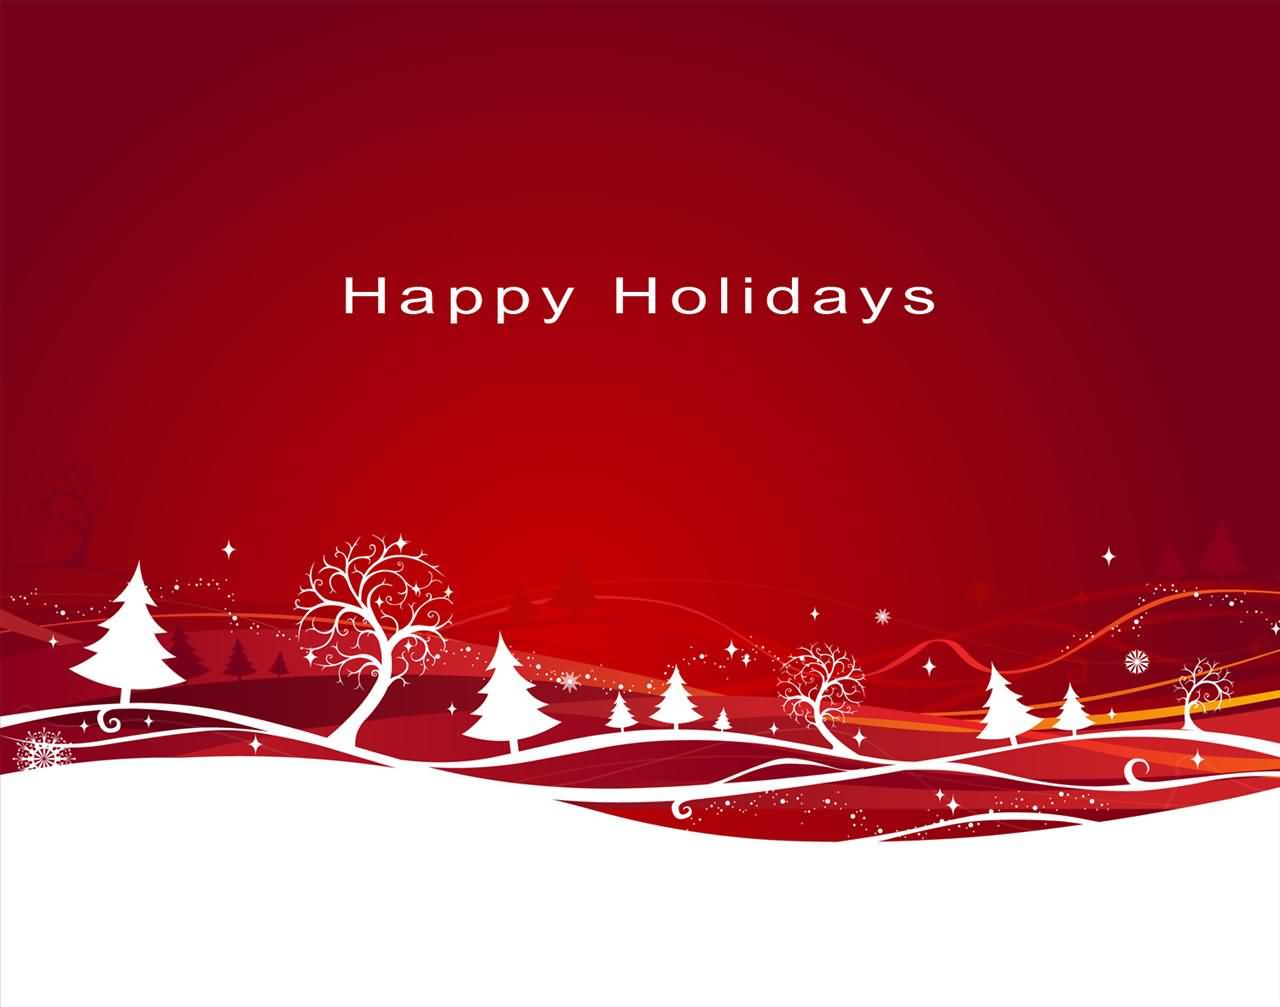 Happy Holidays Wallpaper Graphic